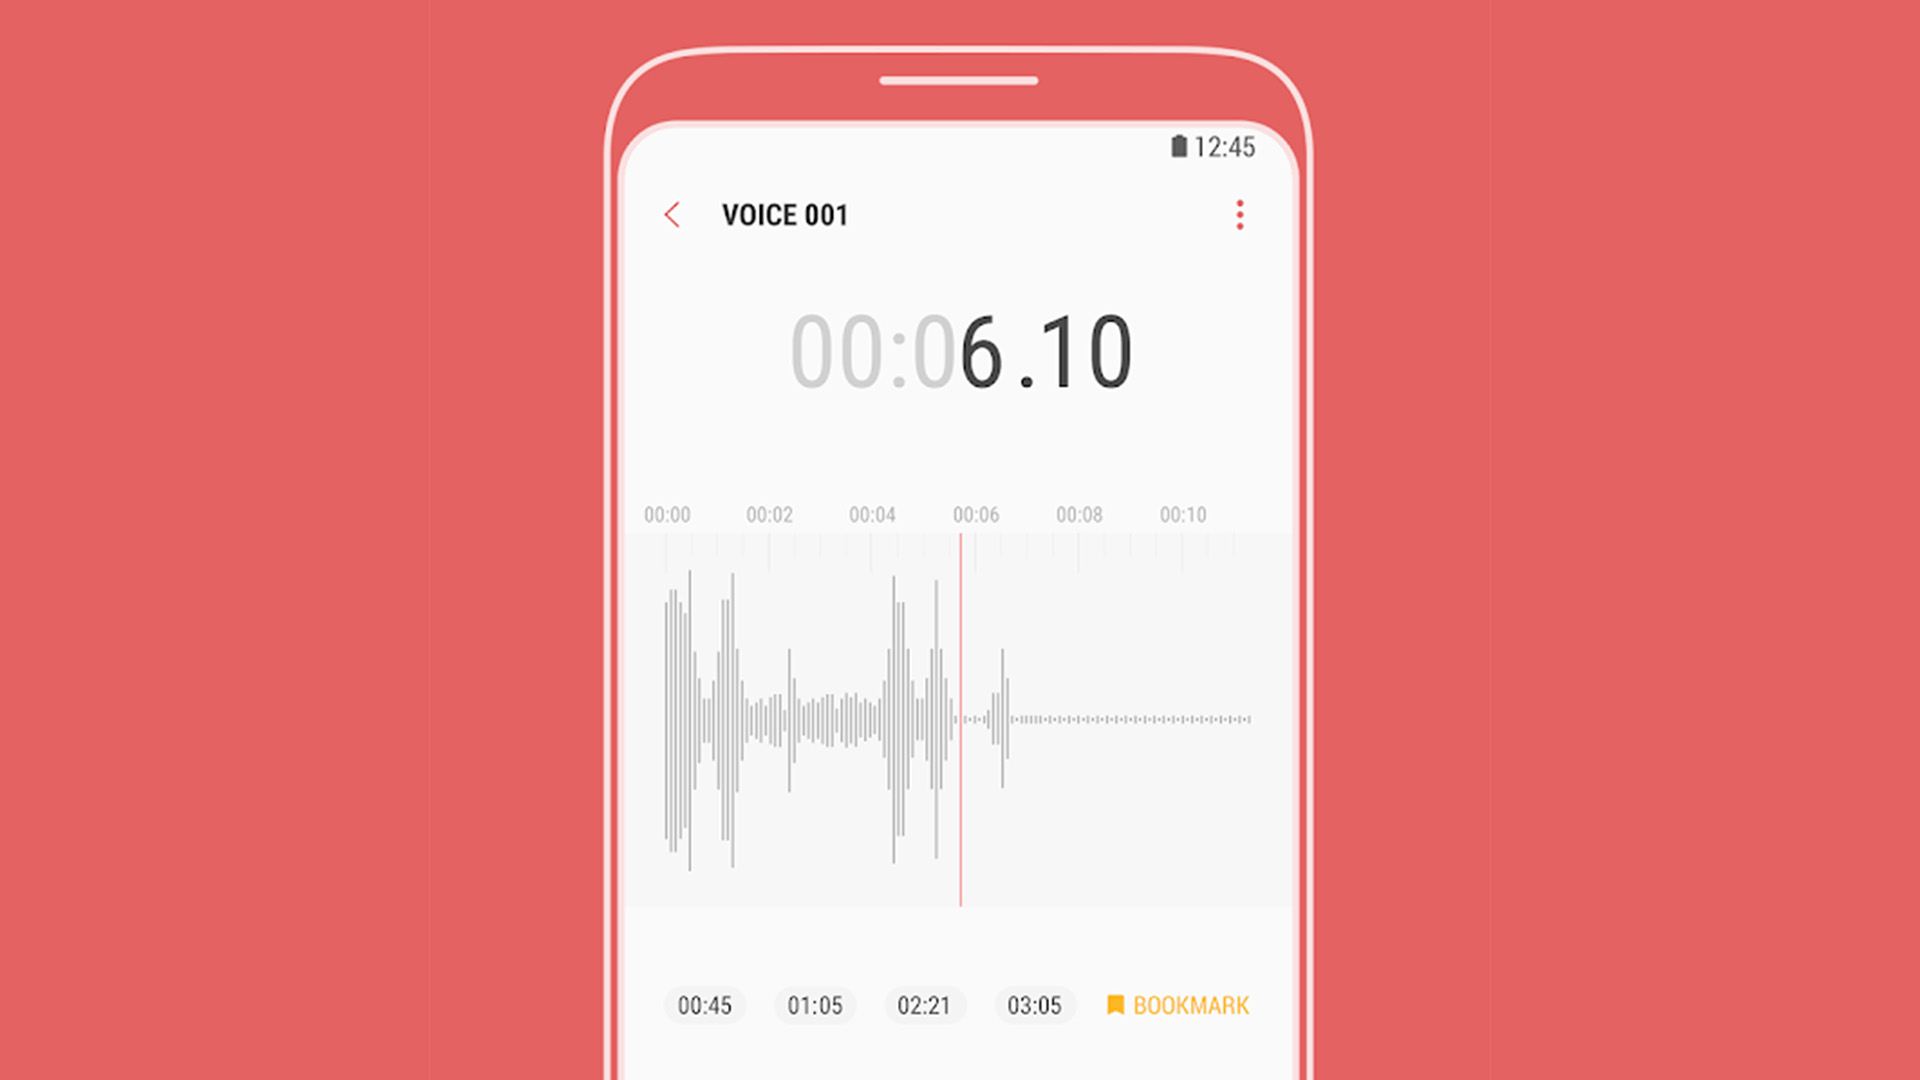 10 best voice recorder apps for Android - Android Authority